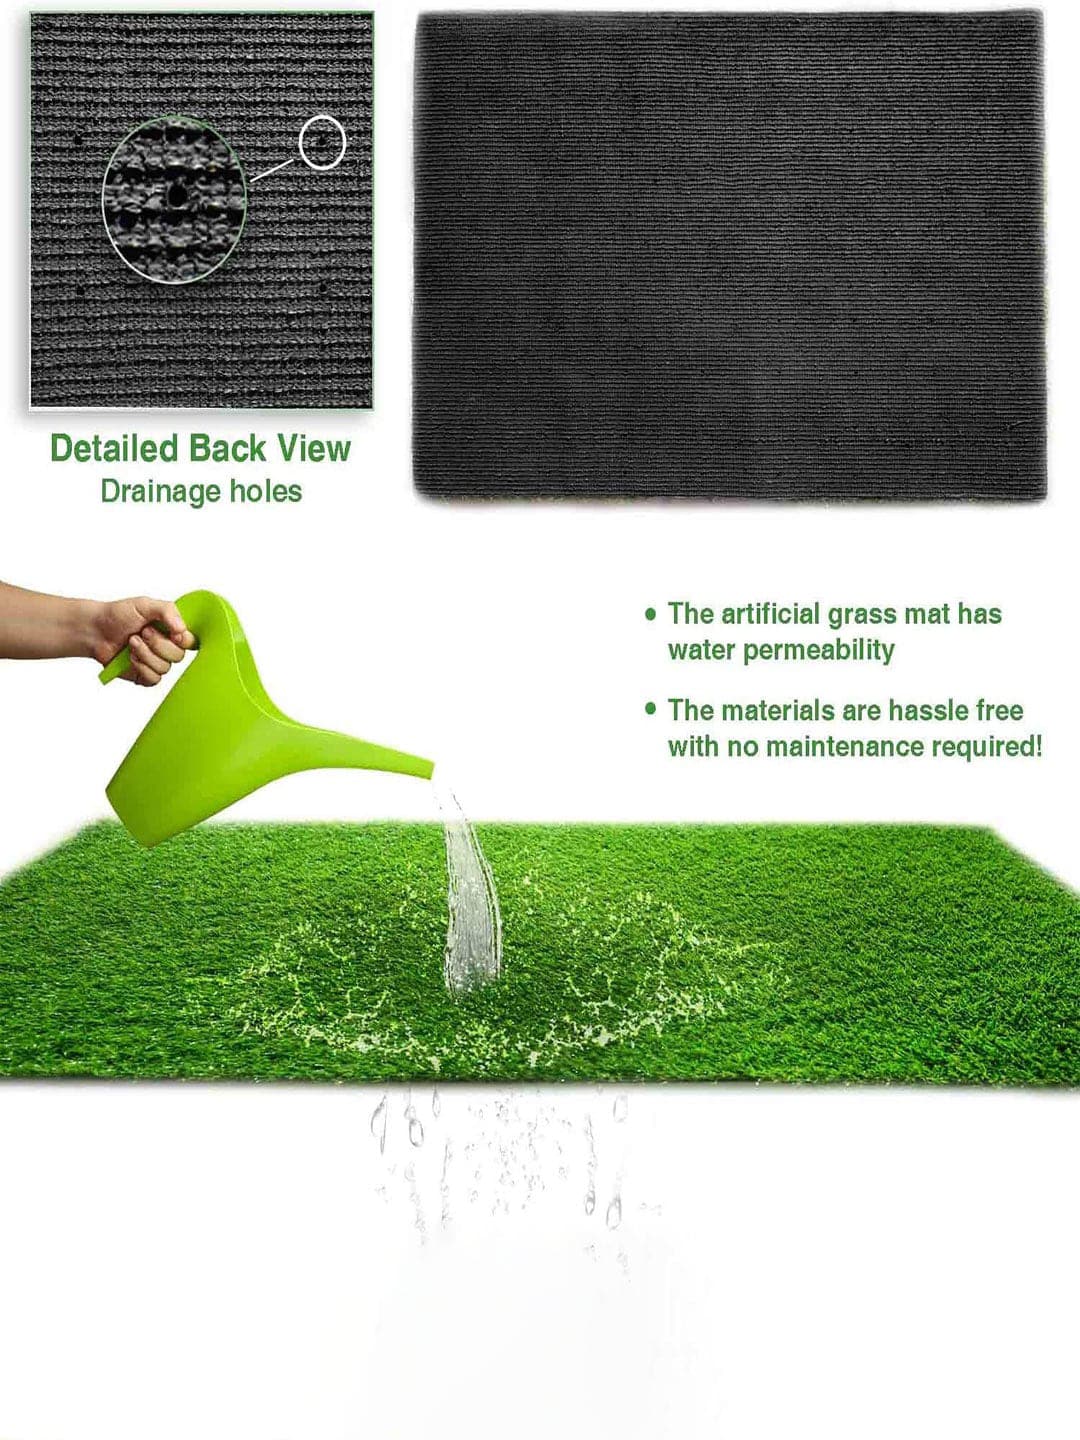 LUXEHOME INTERNATIONAL Green Artificial Grass Price in India